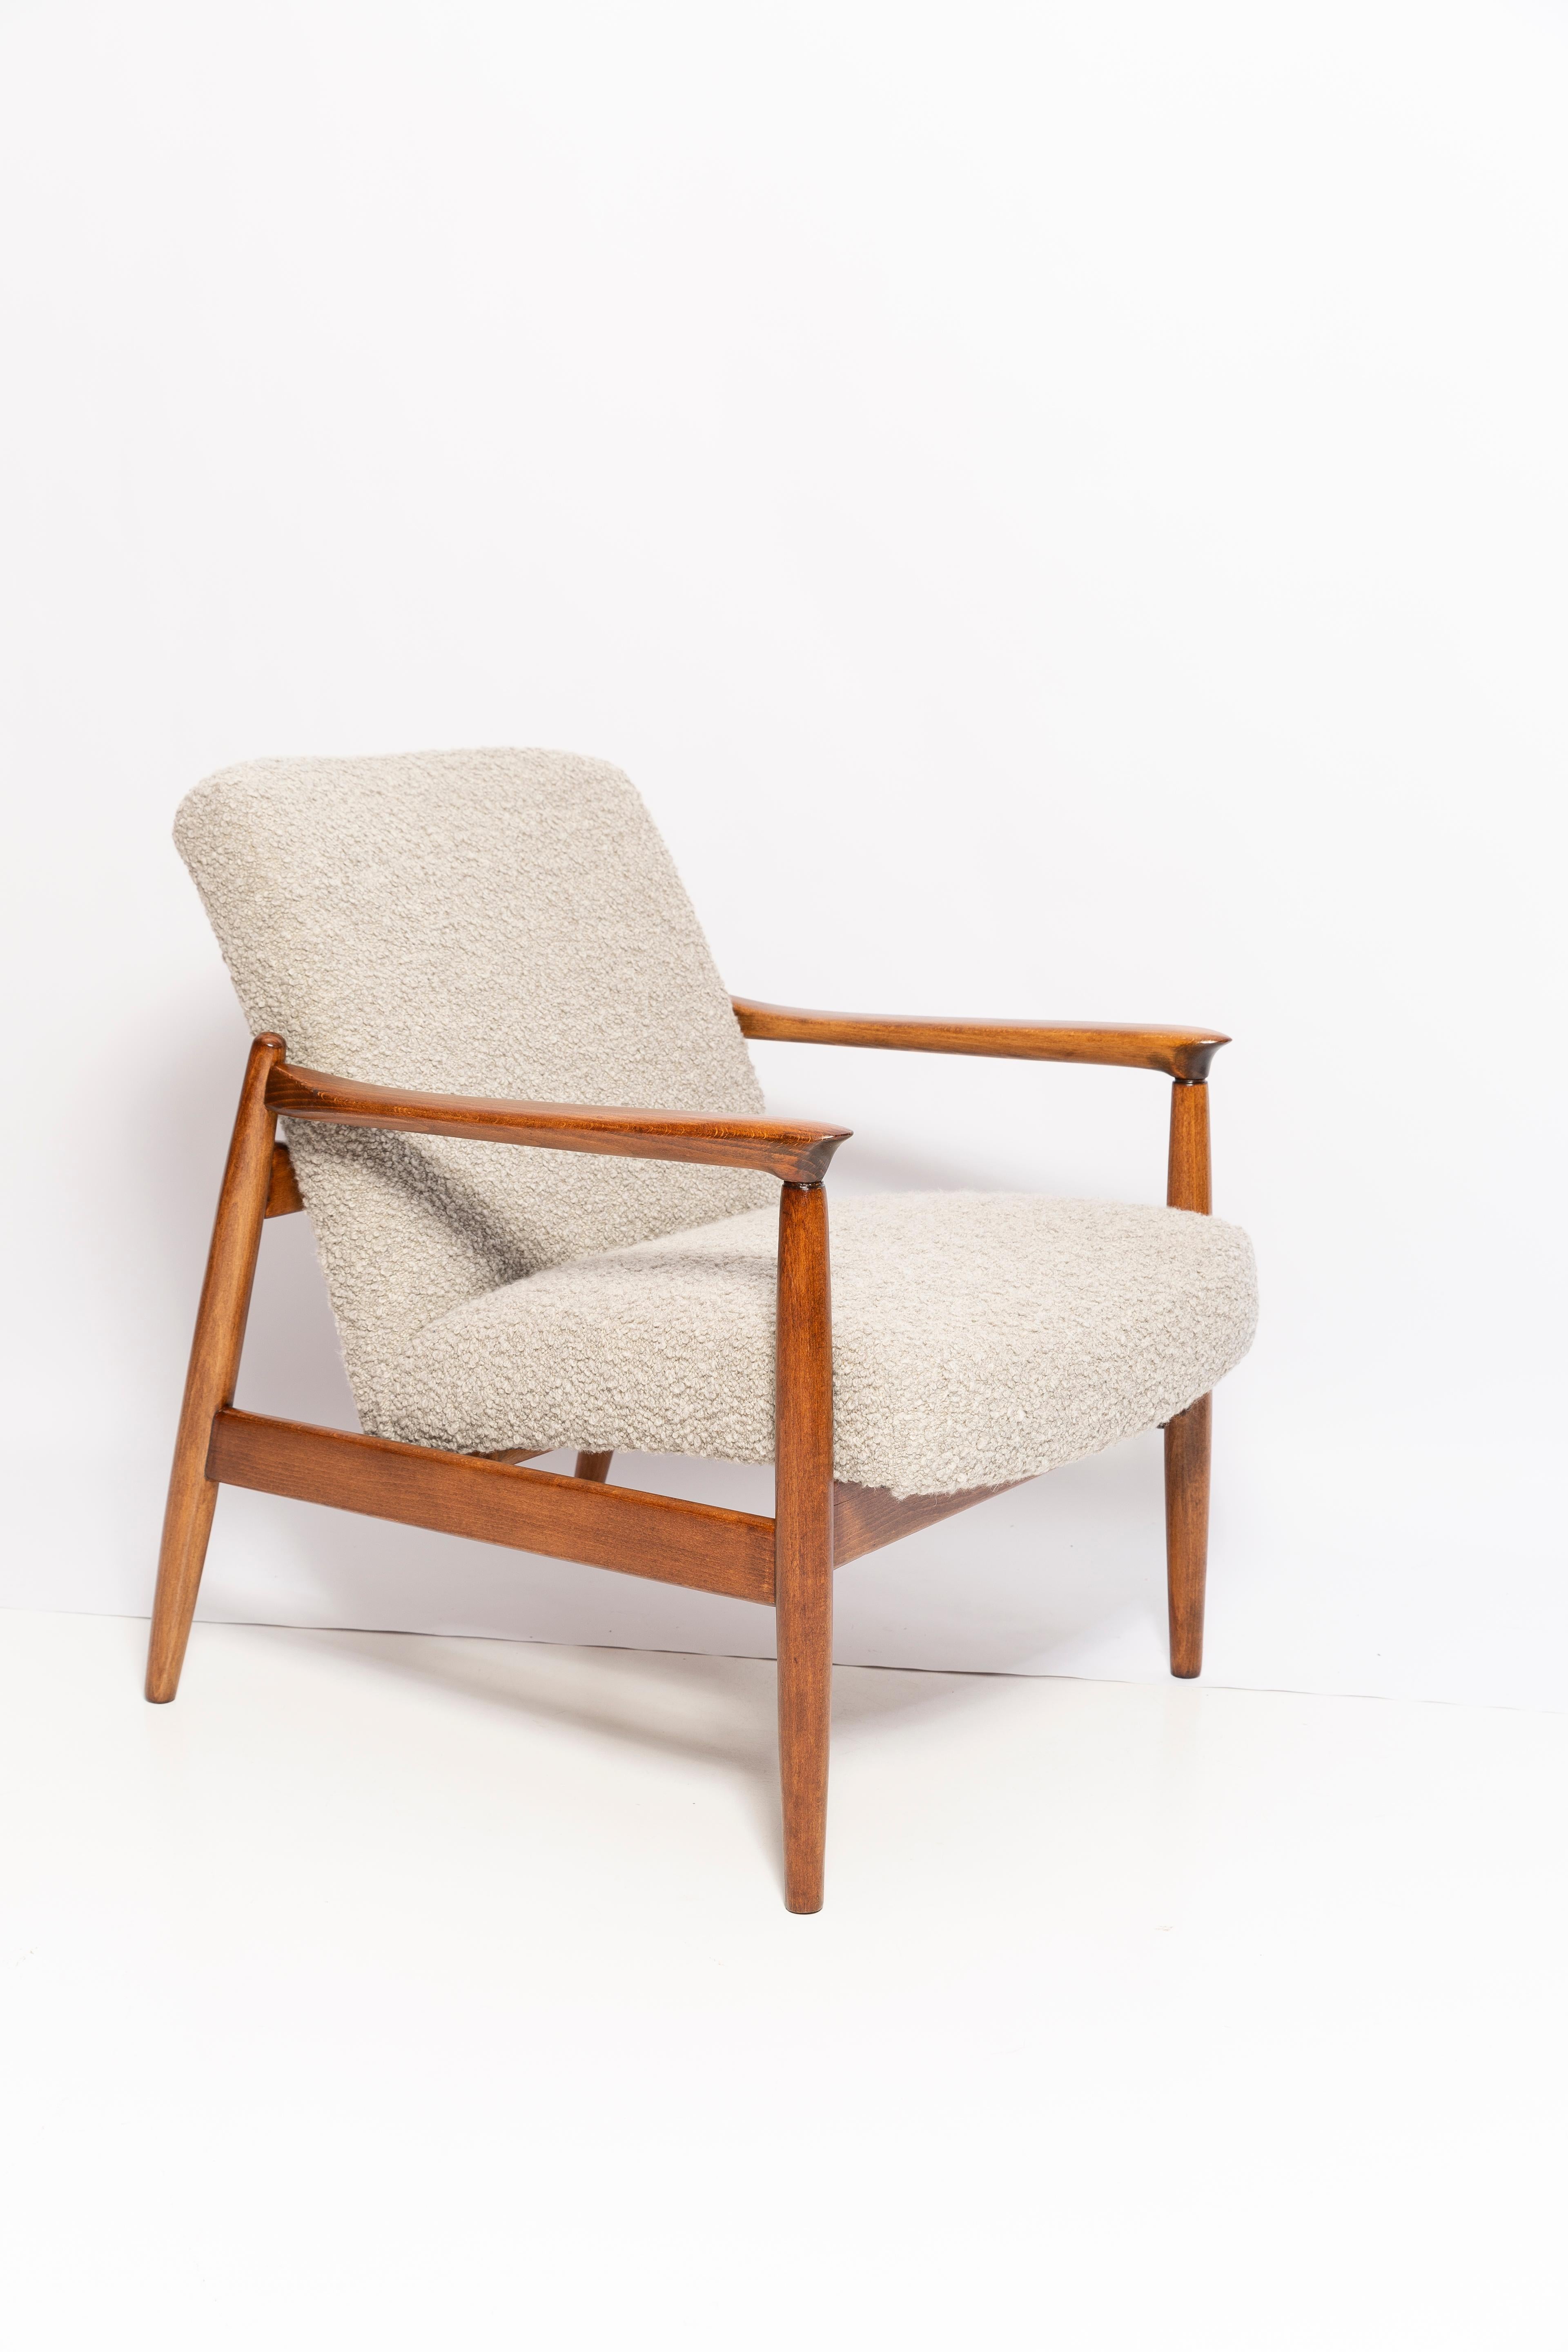 Hand-Crafted Midcentury Gray Alpaca Wool Armchair, Edmund Homa, Poland, 1960s For Sale